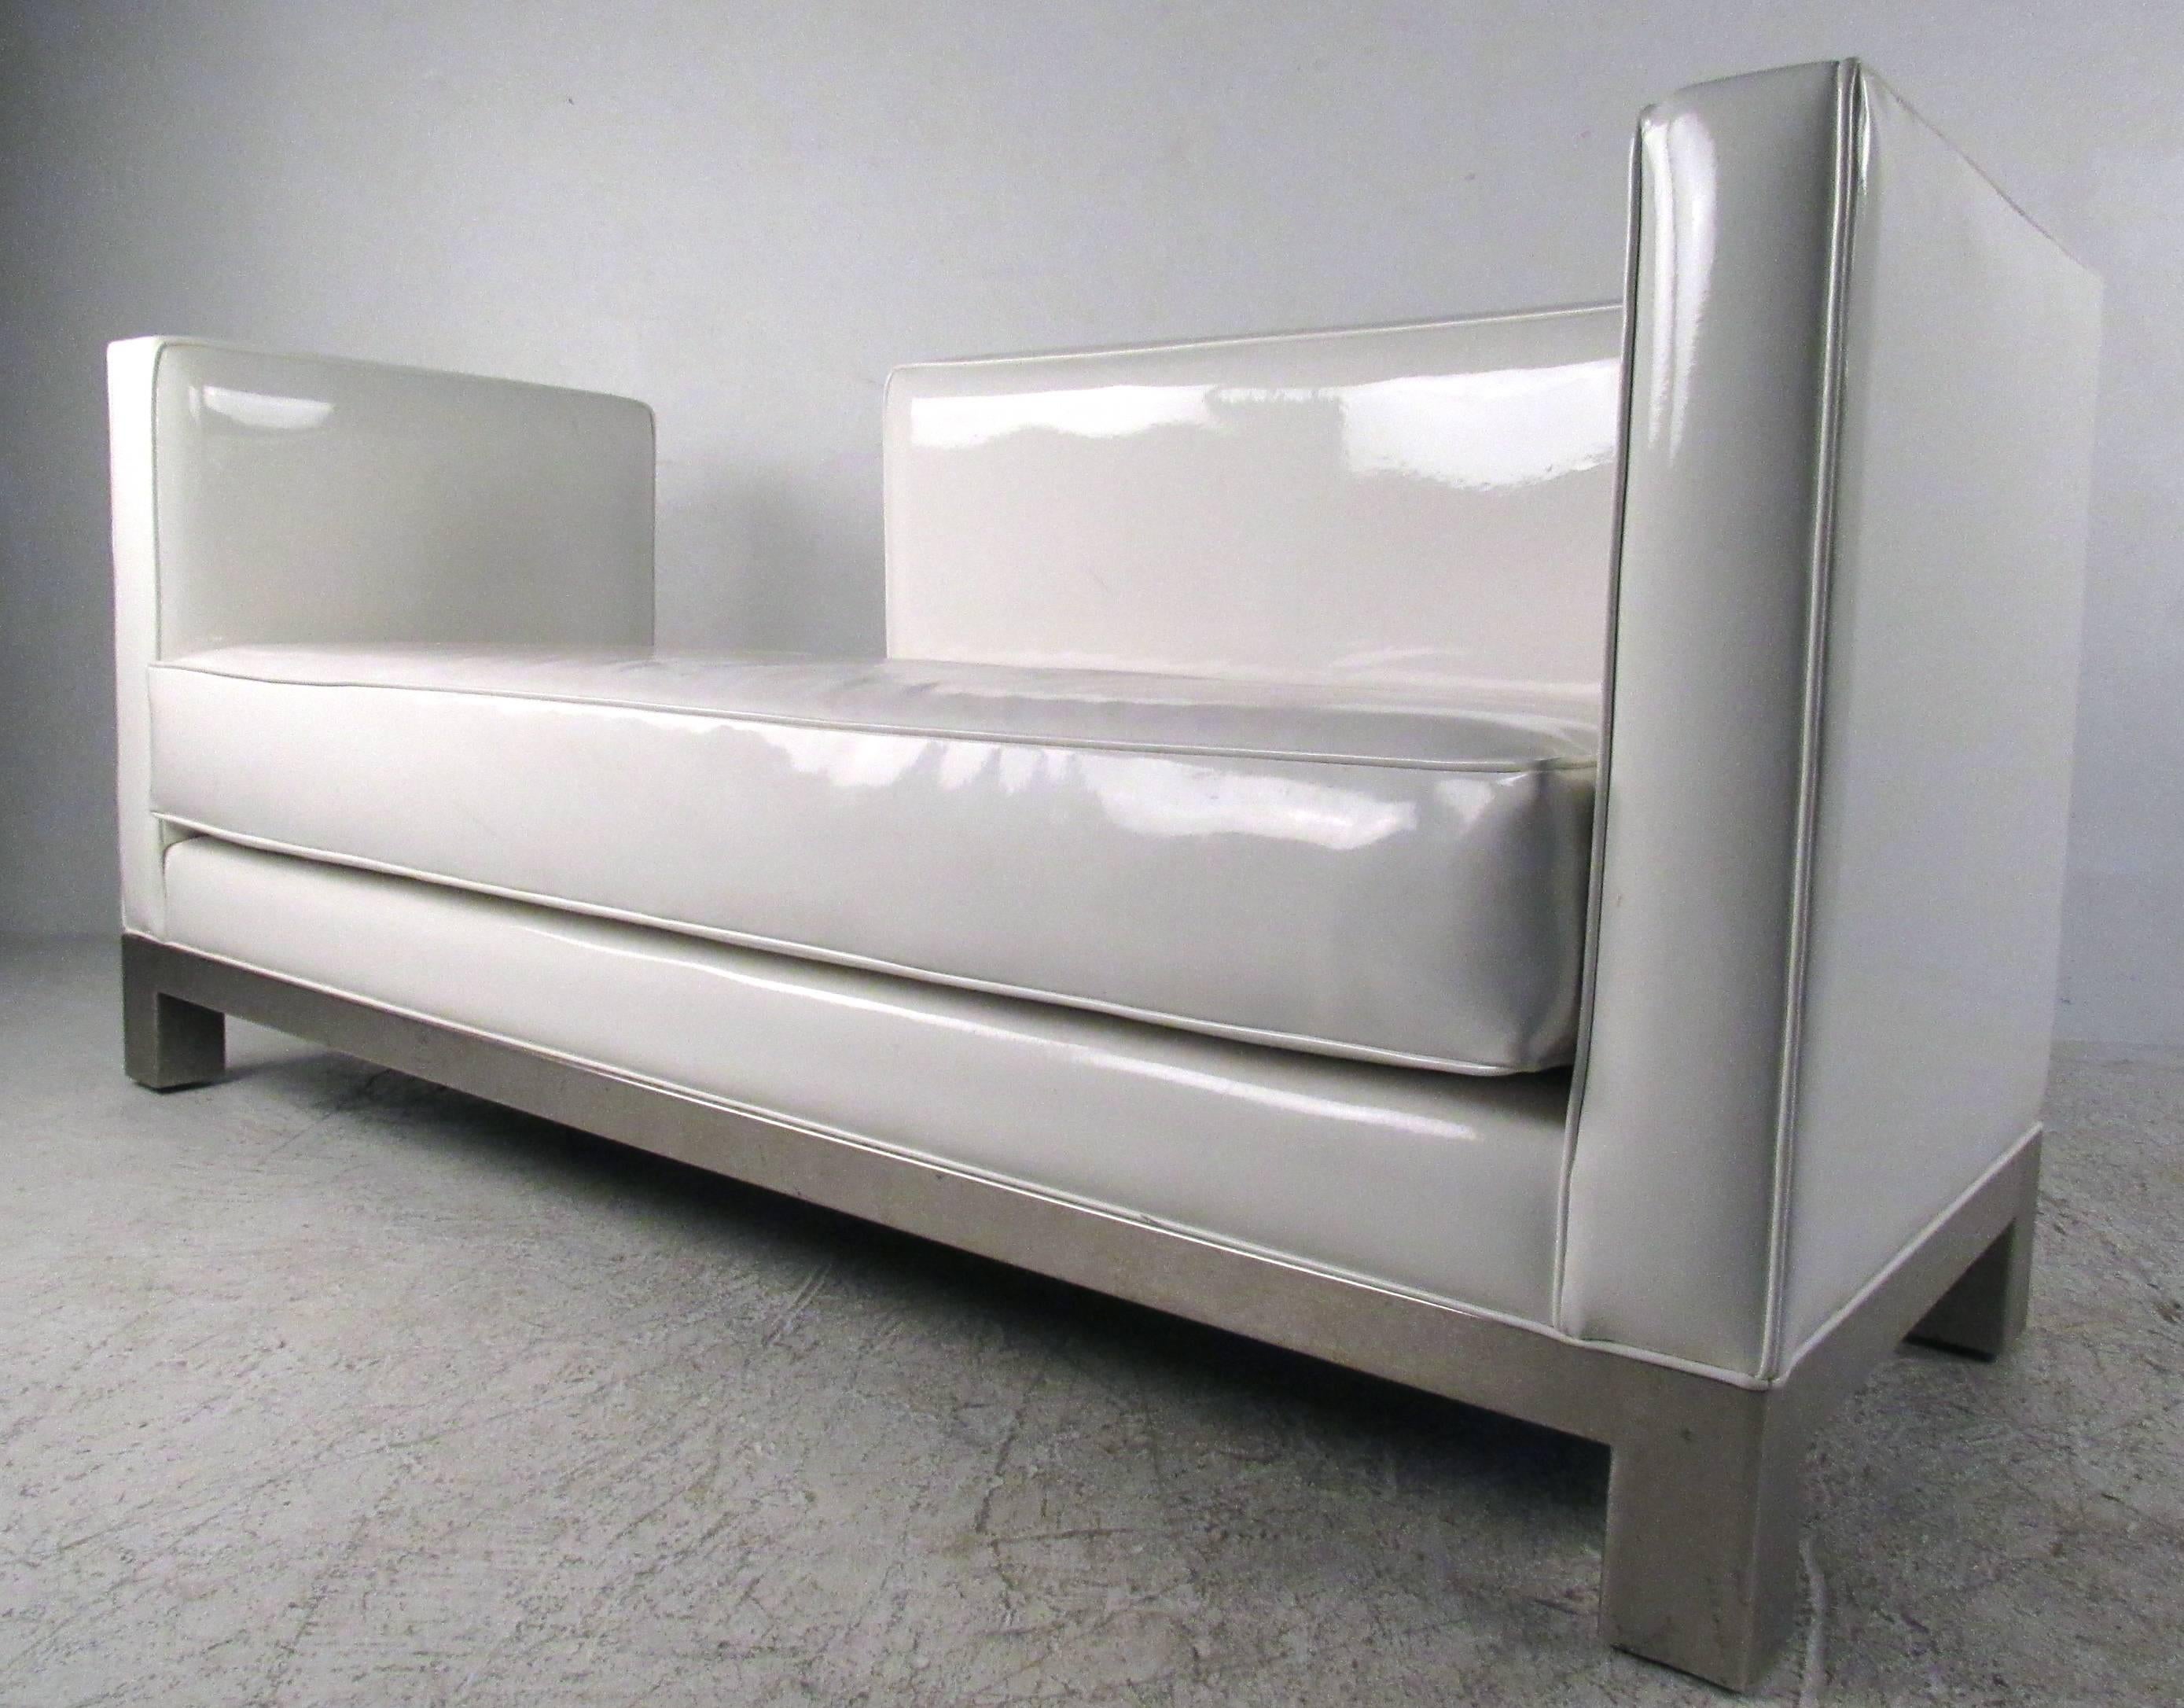 This modern white vinyl lounge makes a comfortable and unique seating addition in home, office, or lobby. Unique sectional style allows for use in a variety of seating arrangements. Brushed metal base paired with vinyl and straight lines add to the